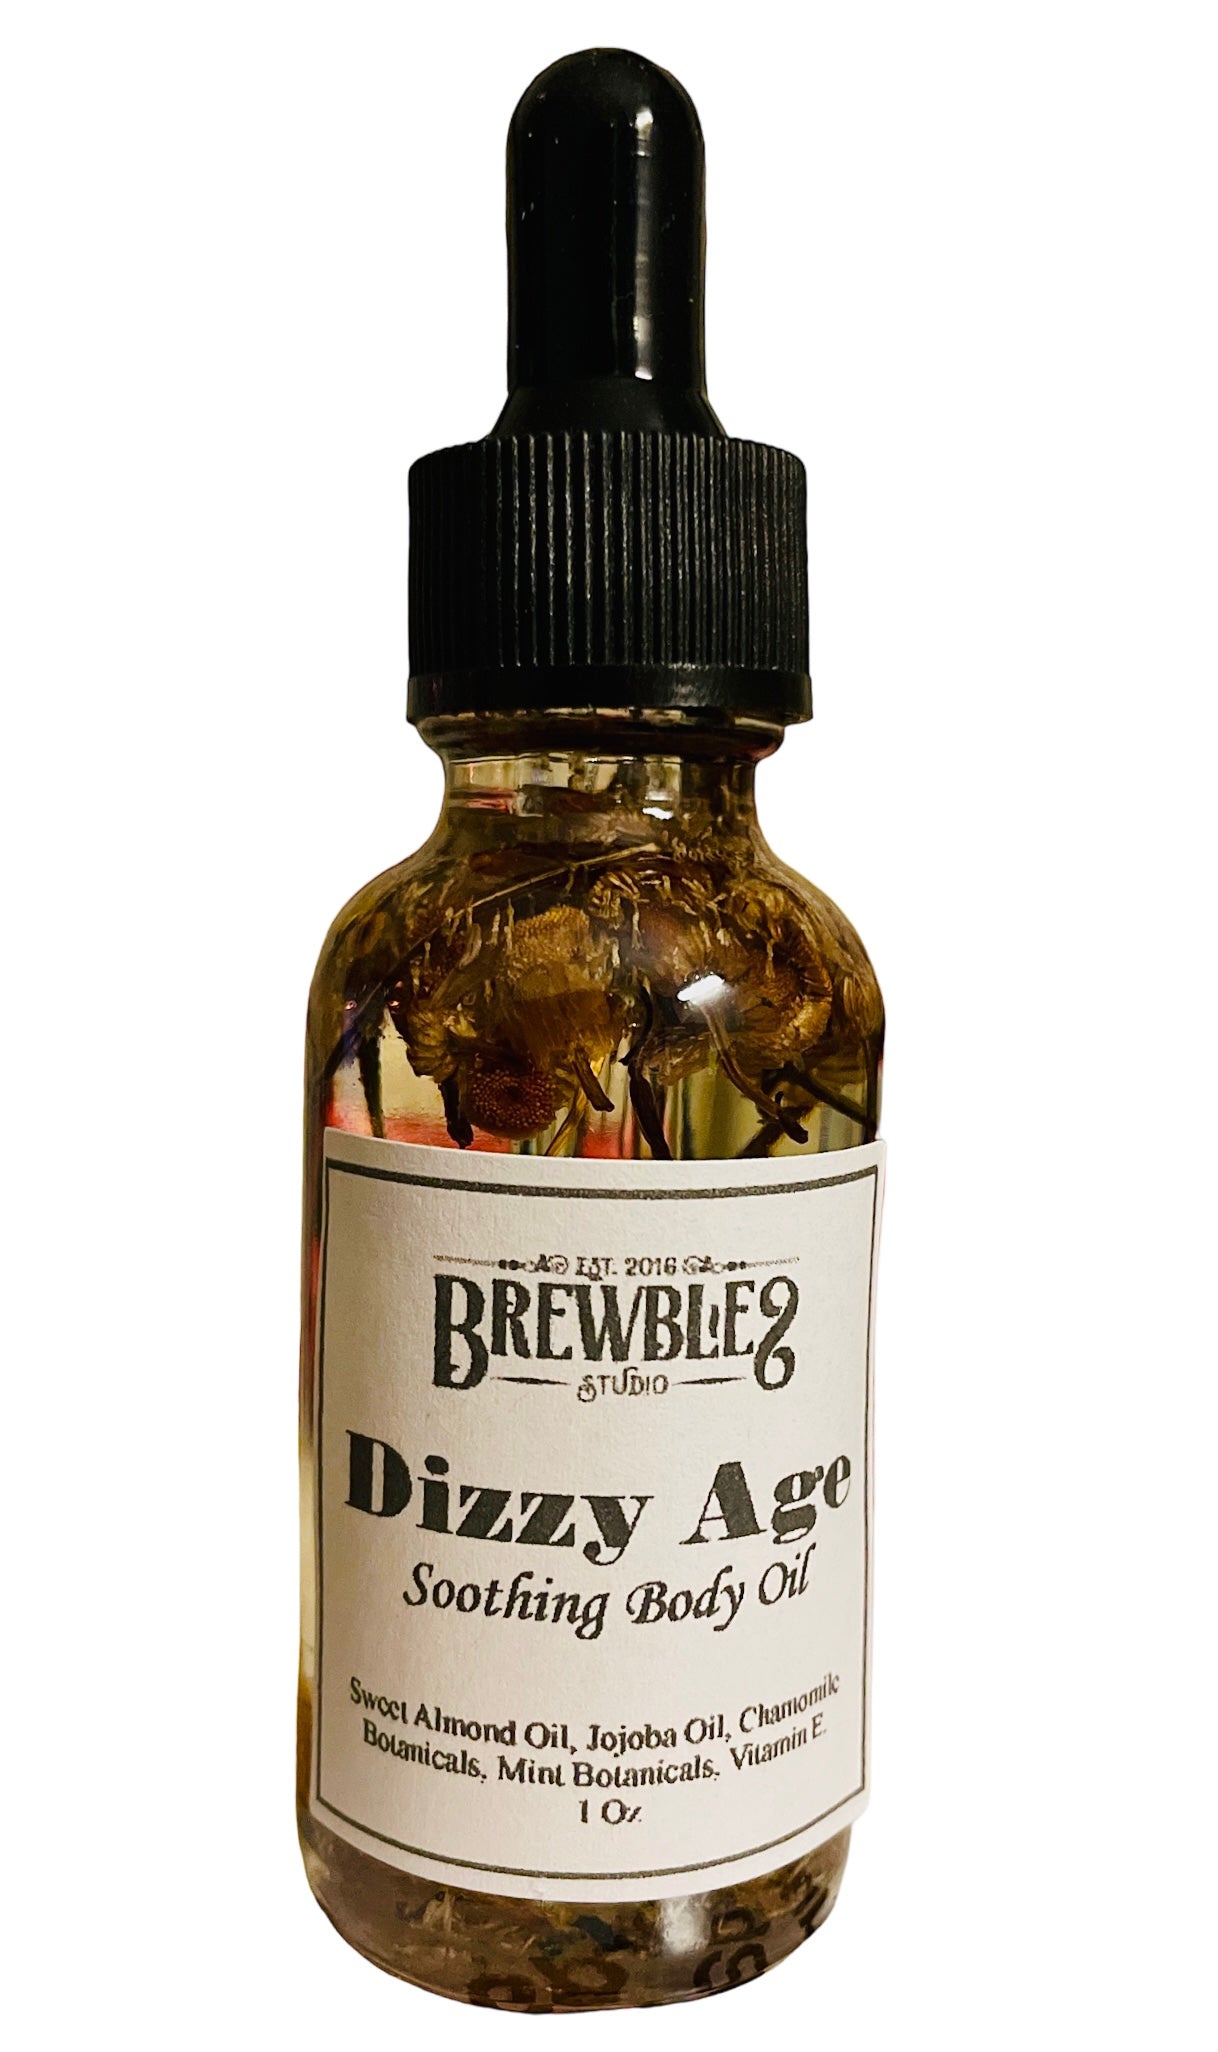 Dizzy Age Soothing Body Oil